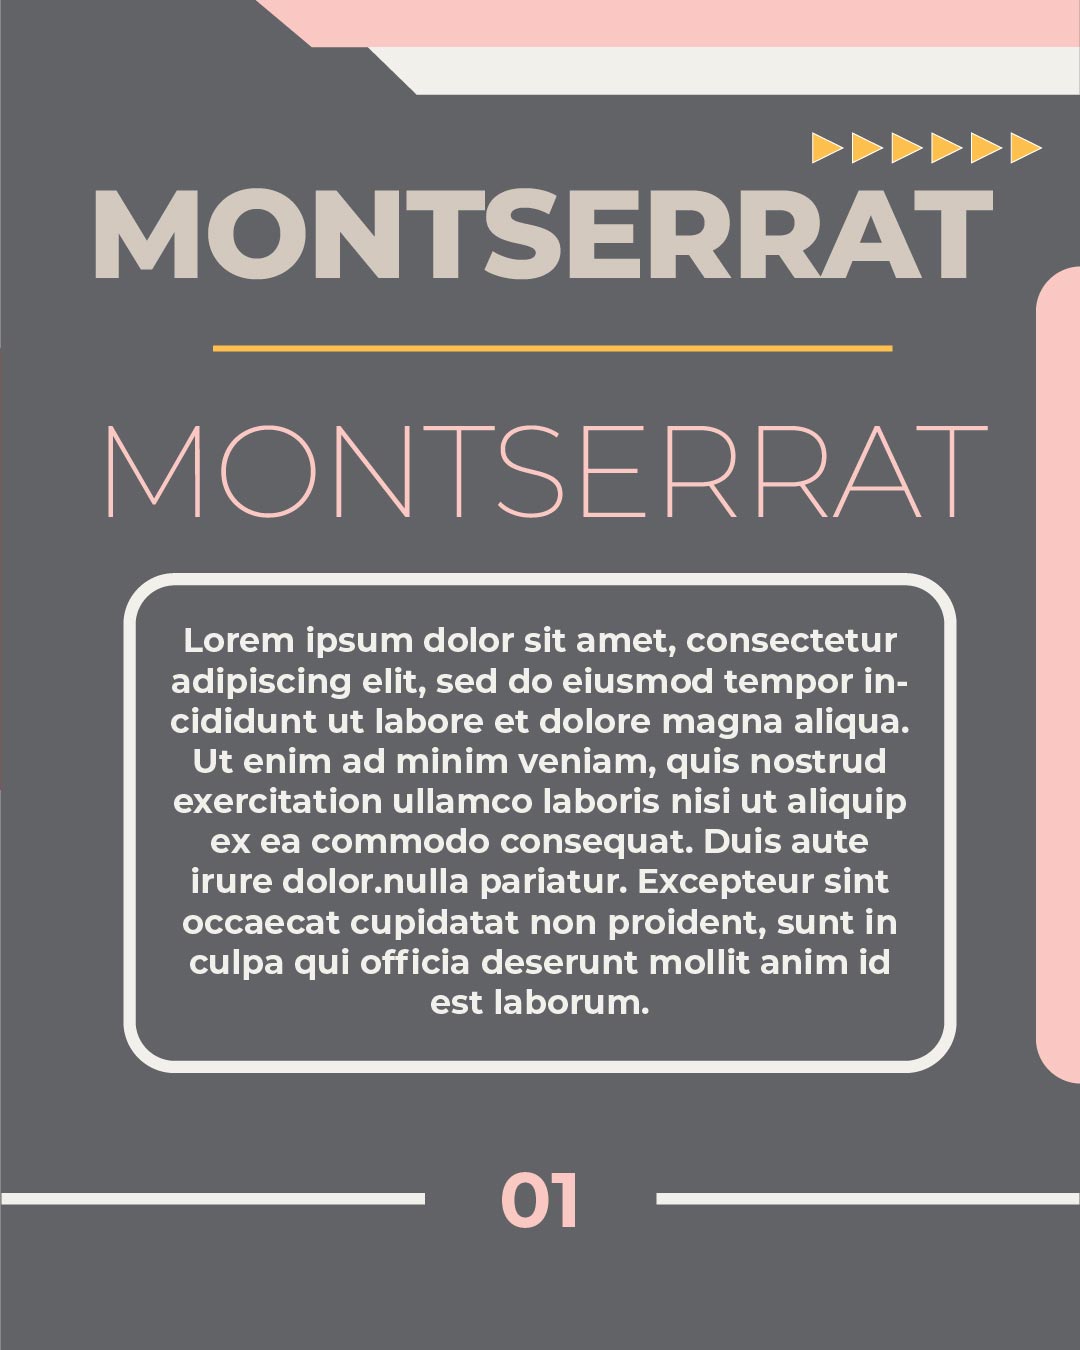 this is an example of montserrat font